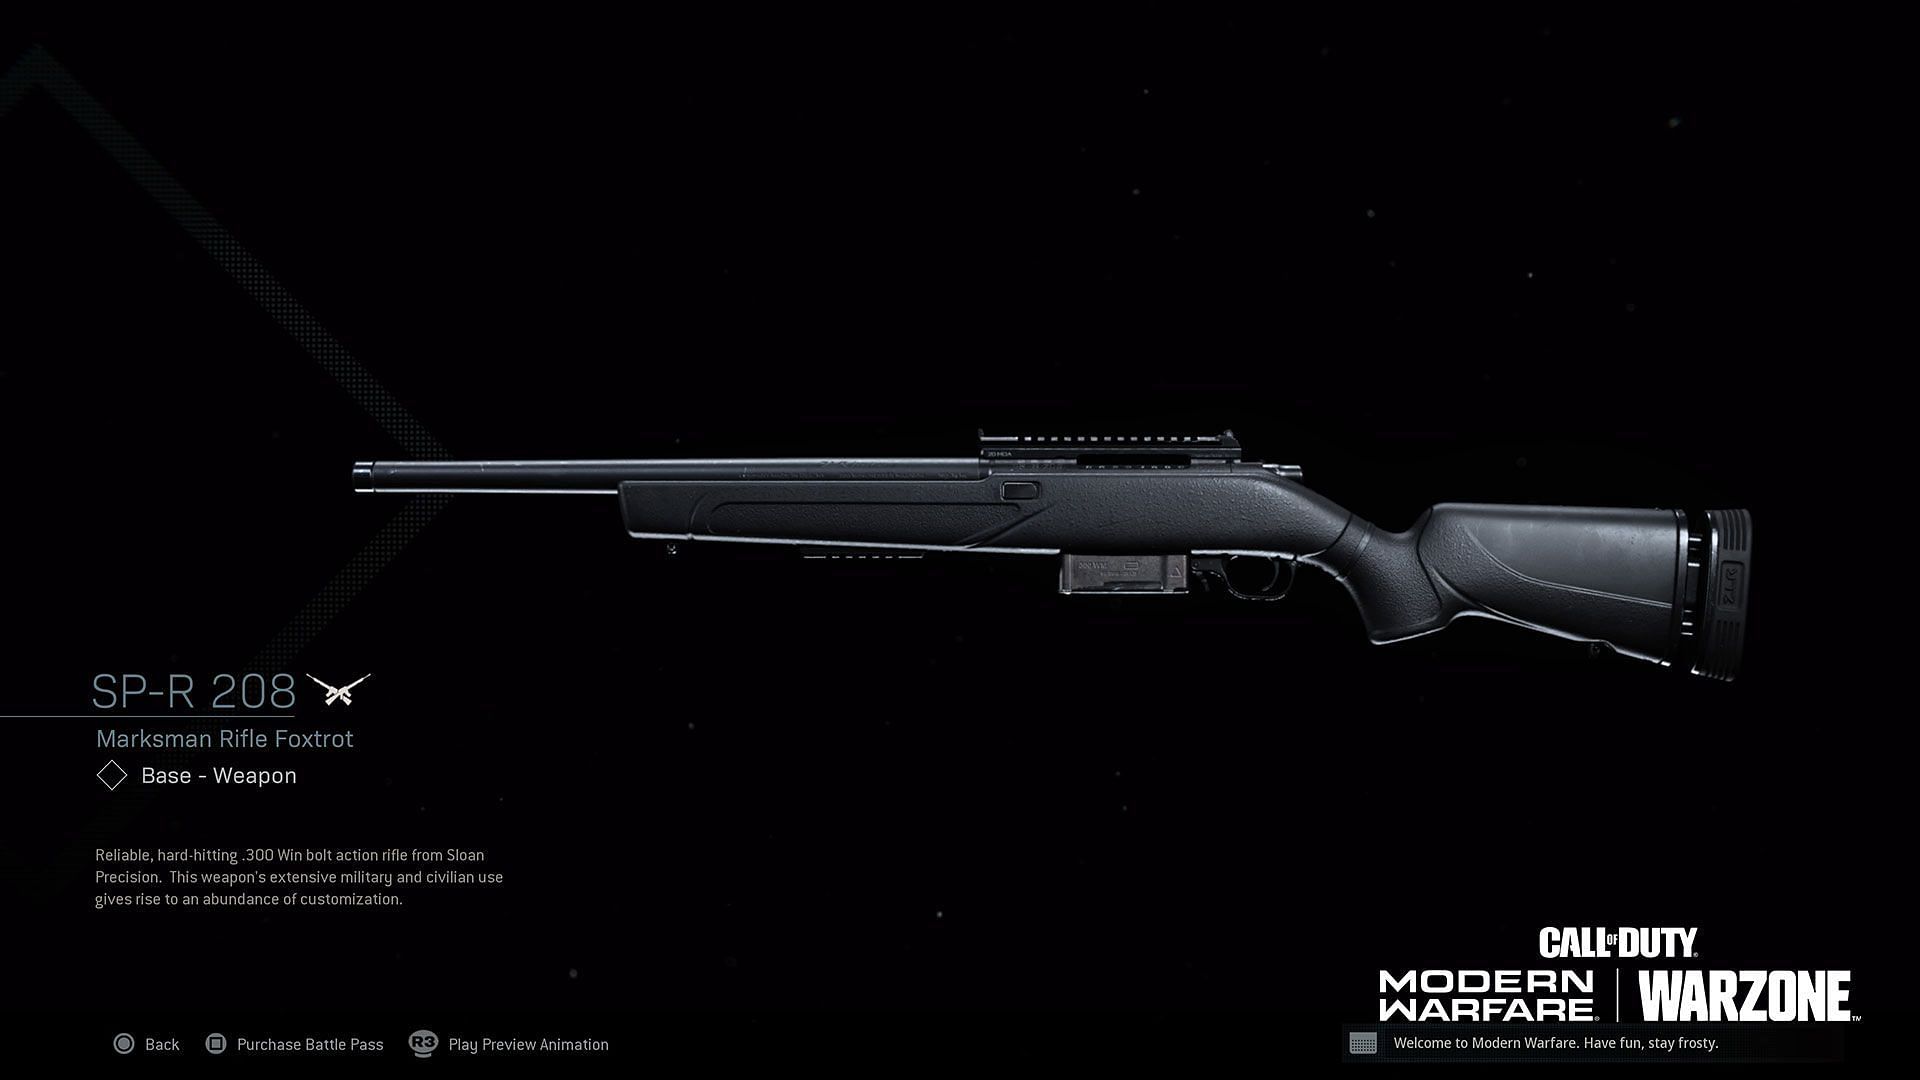 The SP-R208 Sniper Rifle (Image via Call of Duty)